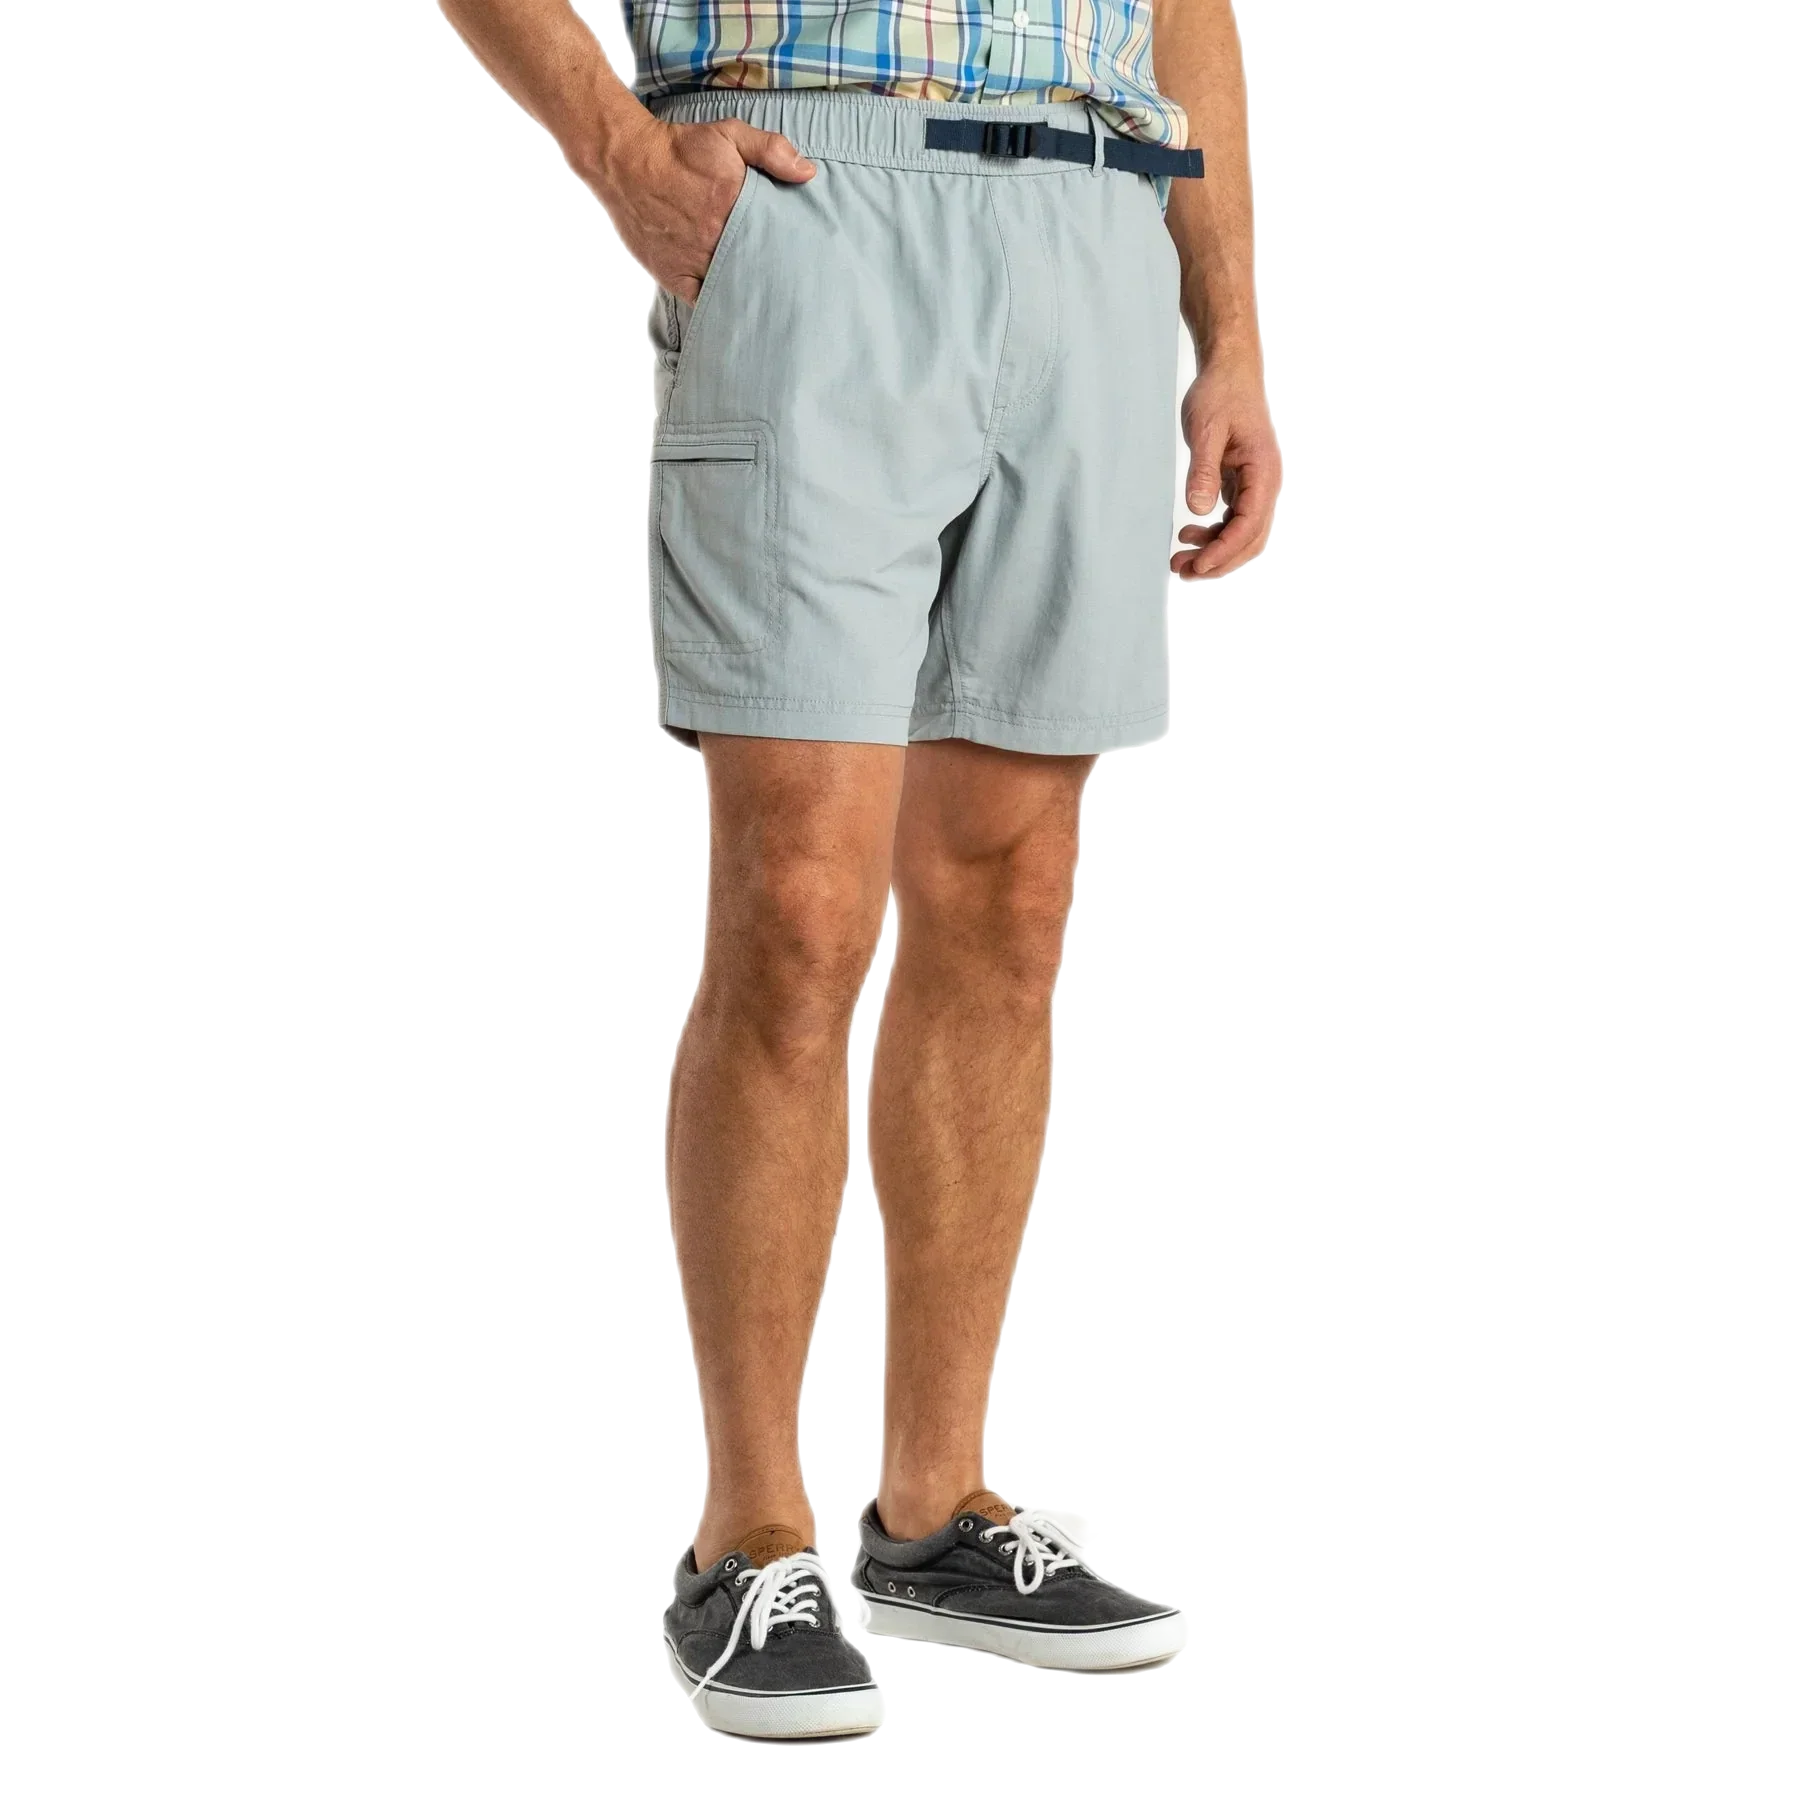 Duck Head 01. MENS APPAREL - MENS SHORTS - MENS SHORTS CASUAL Men's On The Fly Performance Short 7 in 068 QUARRY GREY